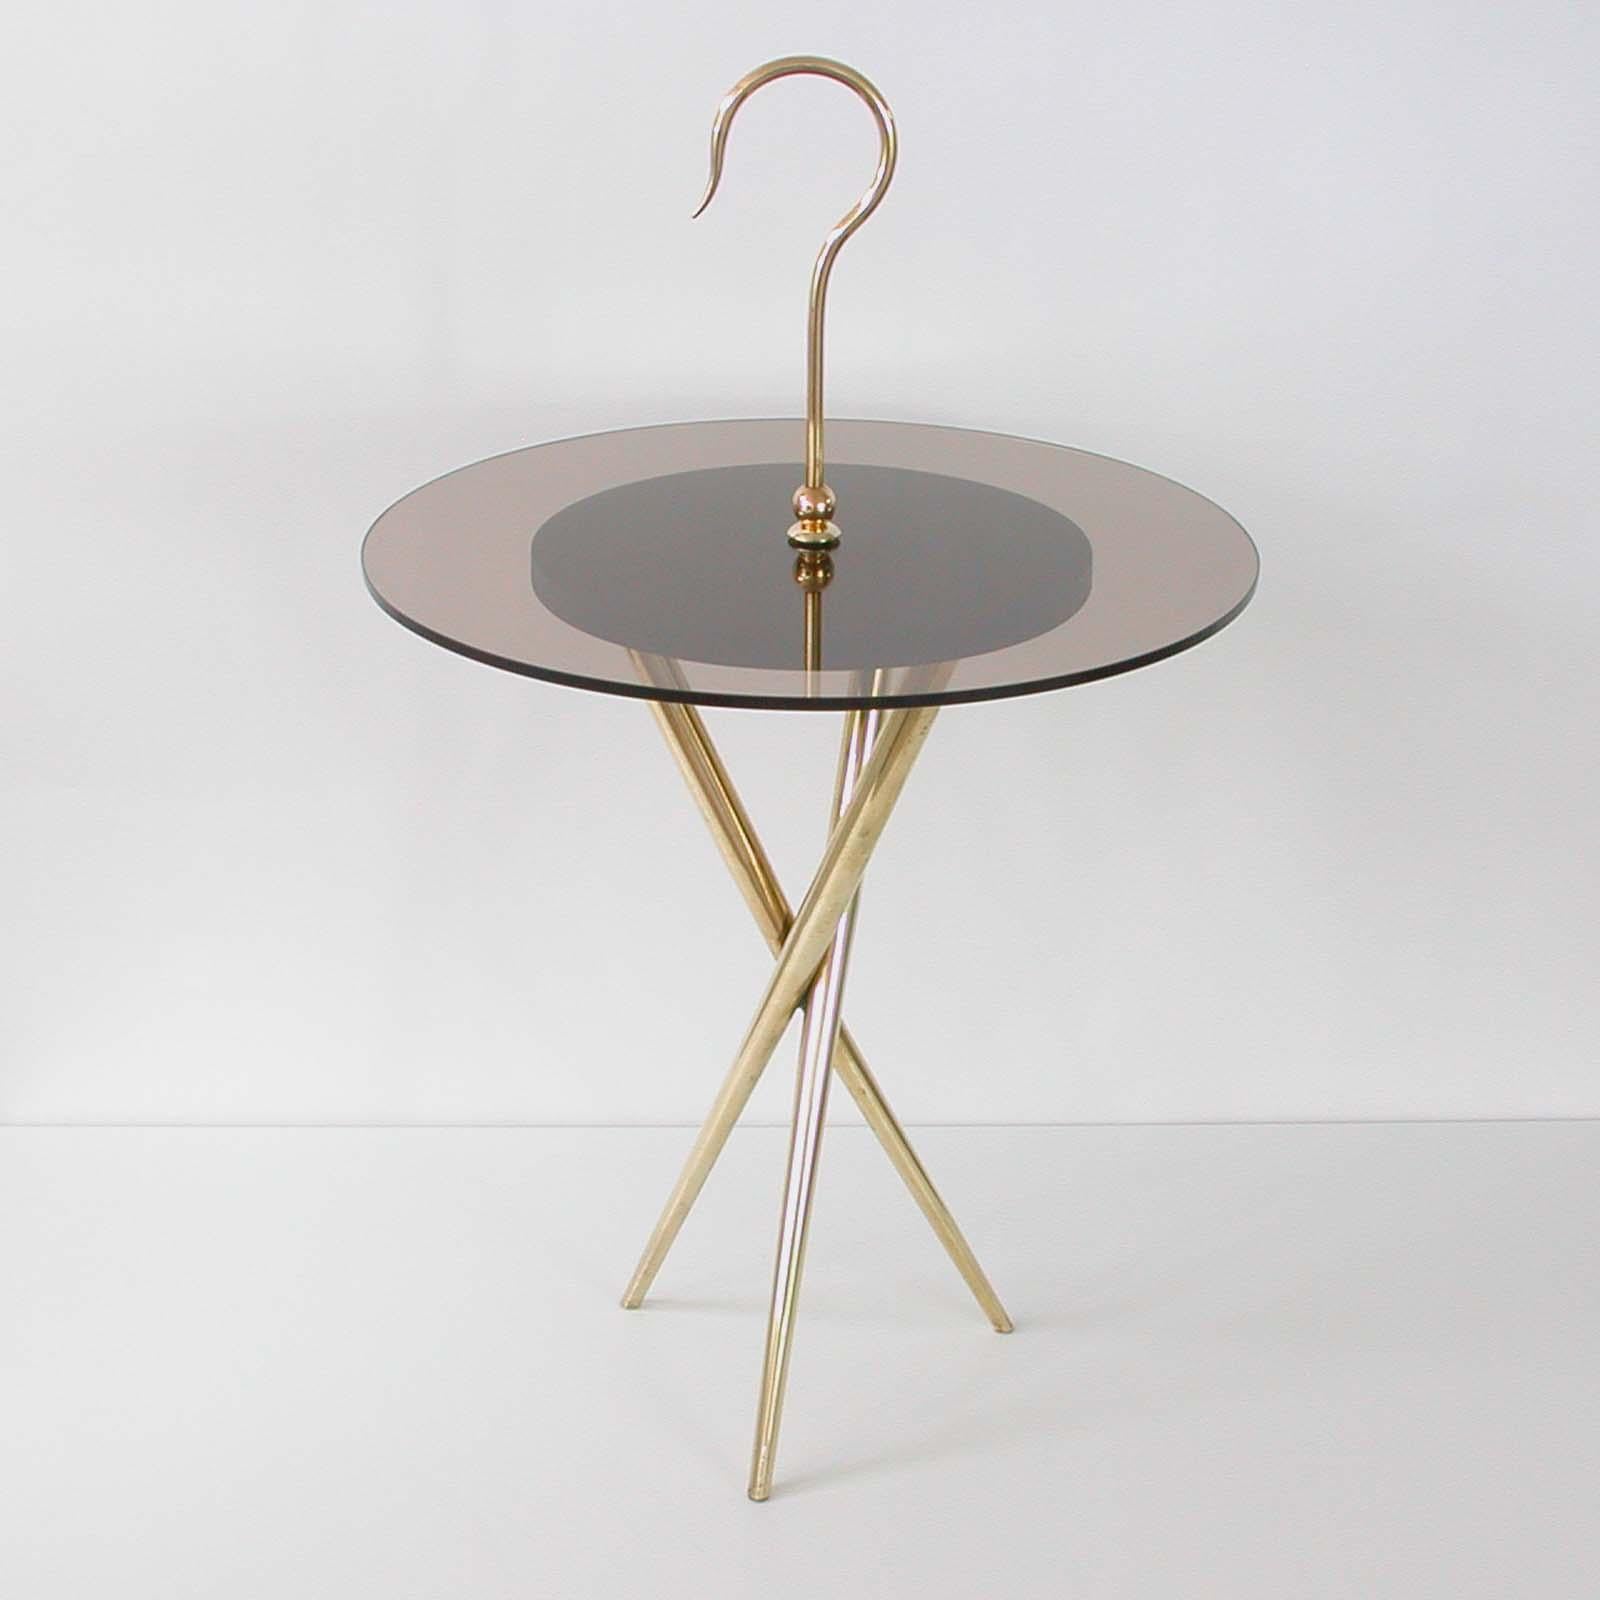 Italian Midcentury Brass and Tinted Glass Occasional Table, 1950s For Sale 4